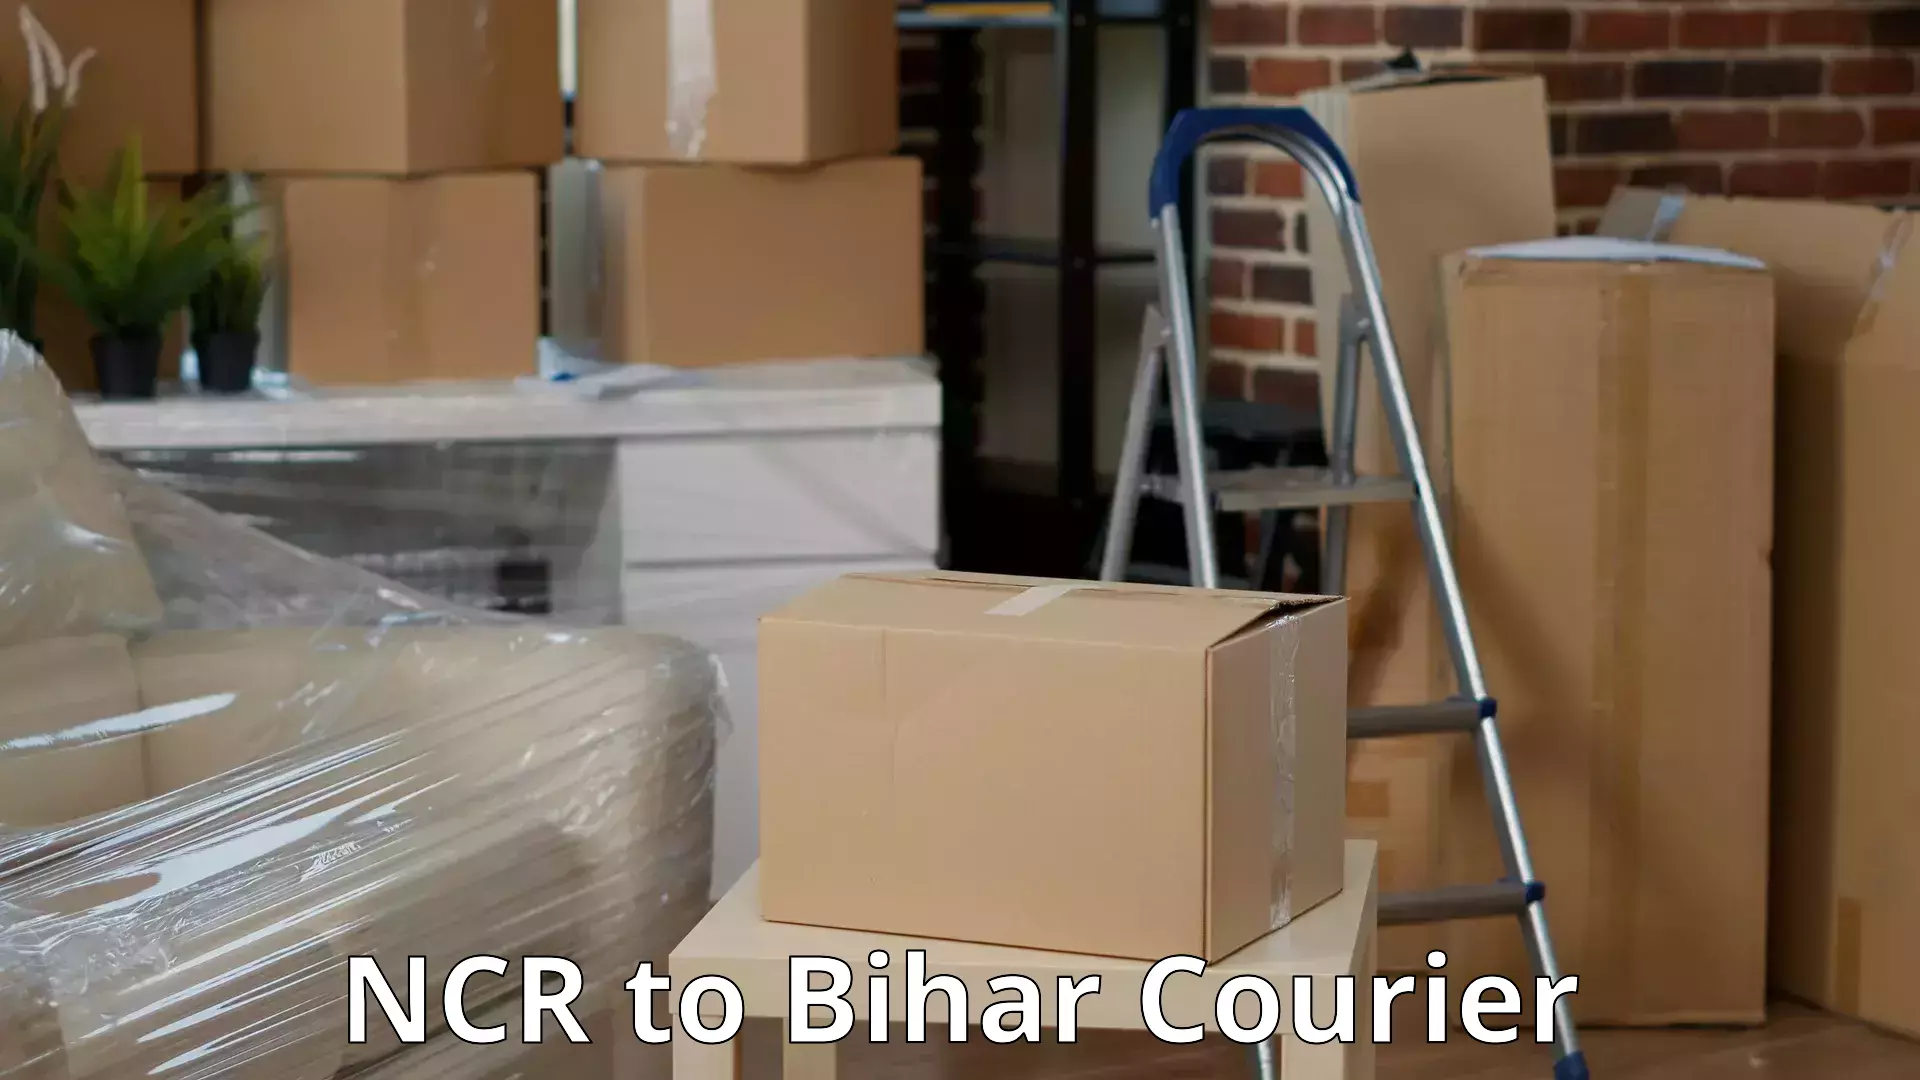 Professional relocation services NCR to Chainpur